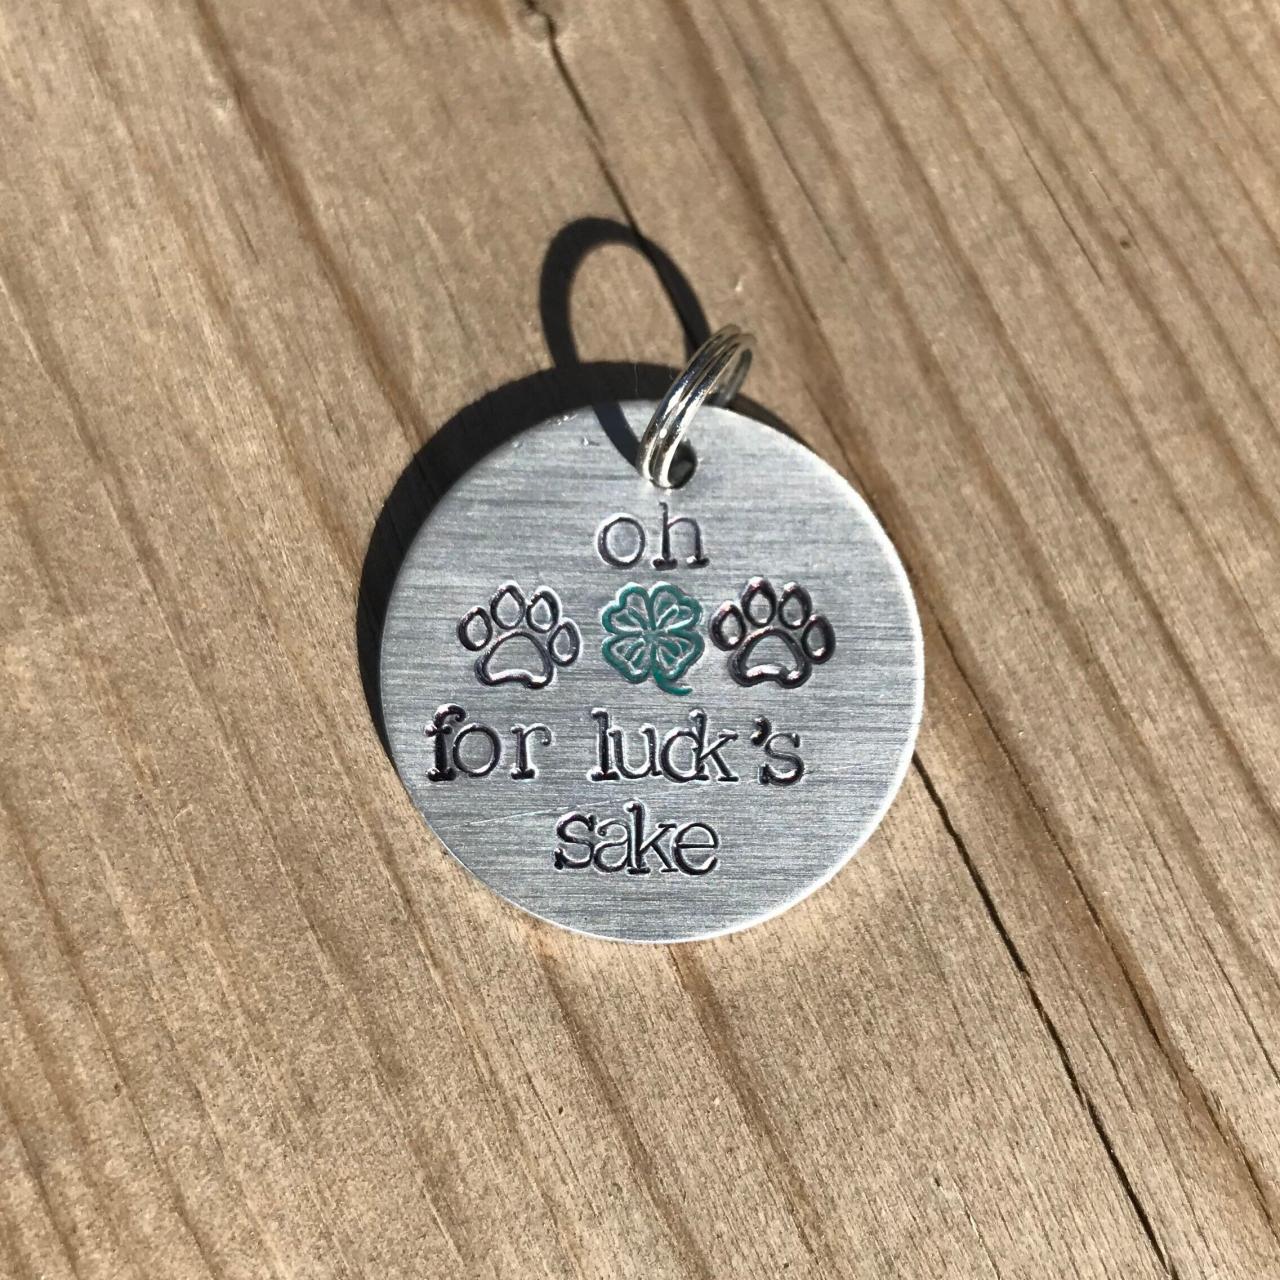 Clover, st pattys day, green, saint Patrick’s day, pet tag, oh for lucks sake, custom, hand made